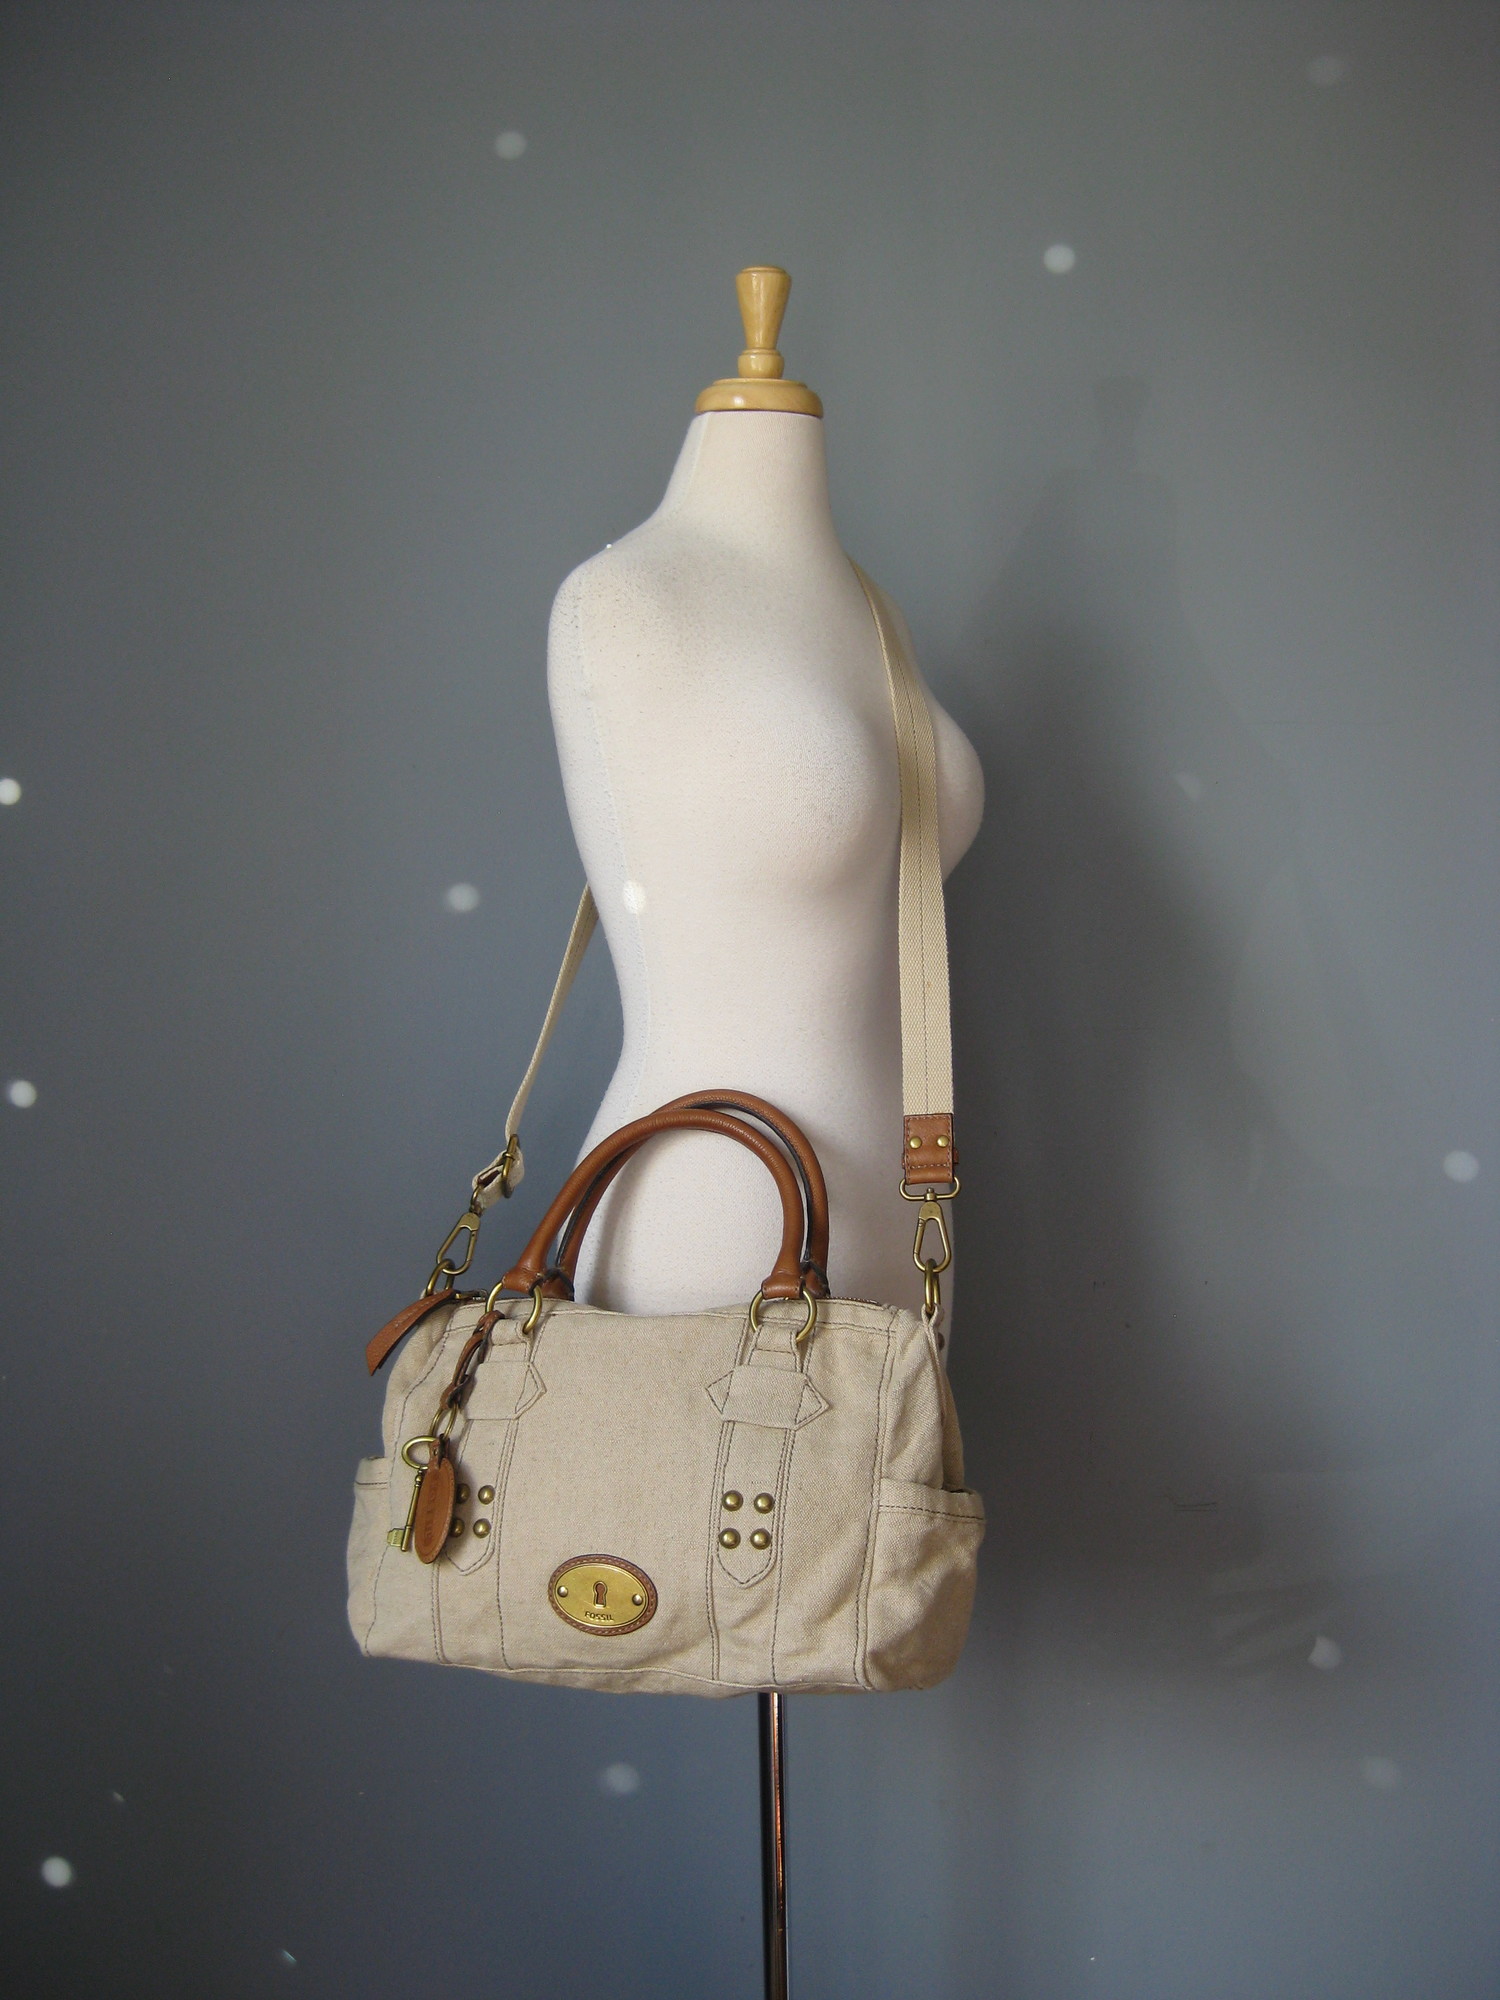 fabulous Fossil satchel in beige canvas with brown leather trim.
Double leather handles and a detachable adjustible web shoulder strap
Antique brass hardware
Key bag charm and leather luggage tag
two exterior slip pockets on the sides
Chevron striped fabric lining

Super clean inside and out
tiny bit of use on the brass hardware medallion

13in x 9in x 5in
Handle drop: 6.25in
Strap drop at max: 24.5in

Thanks for looking!
#18049

Please see my eBay store for other terrific Fossil and other bags